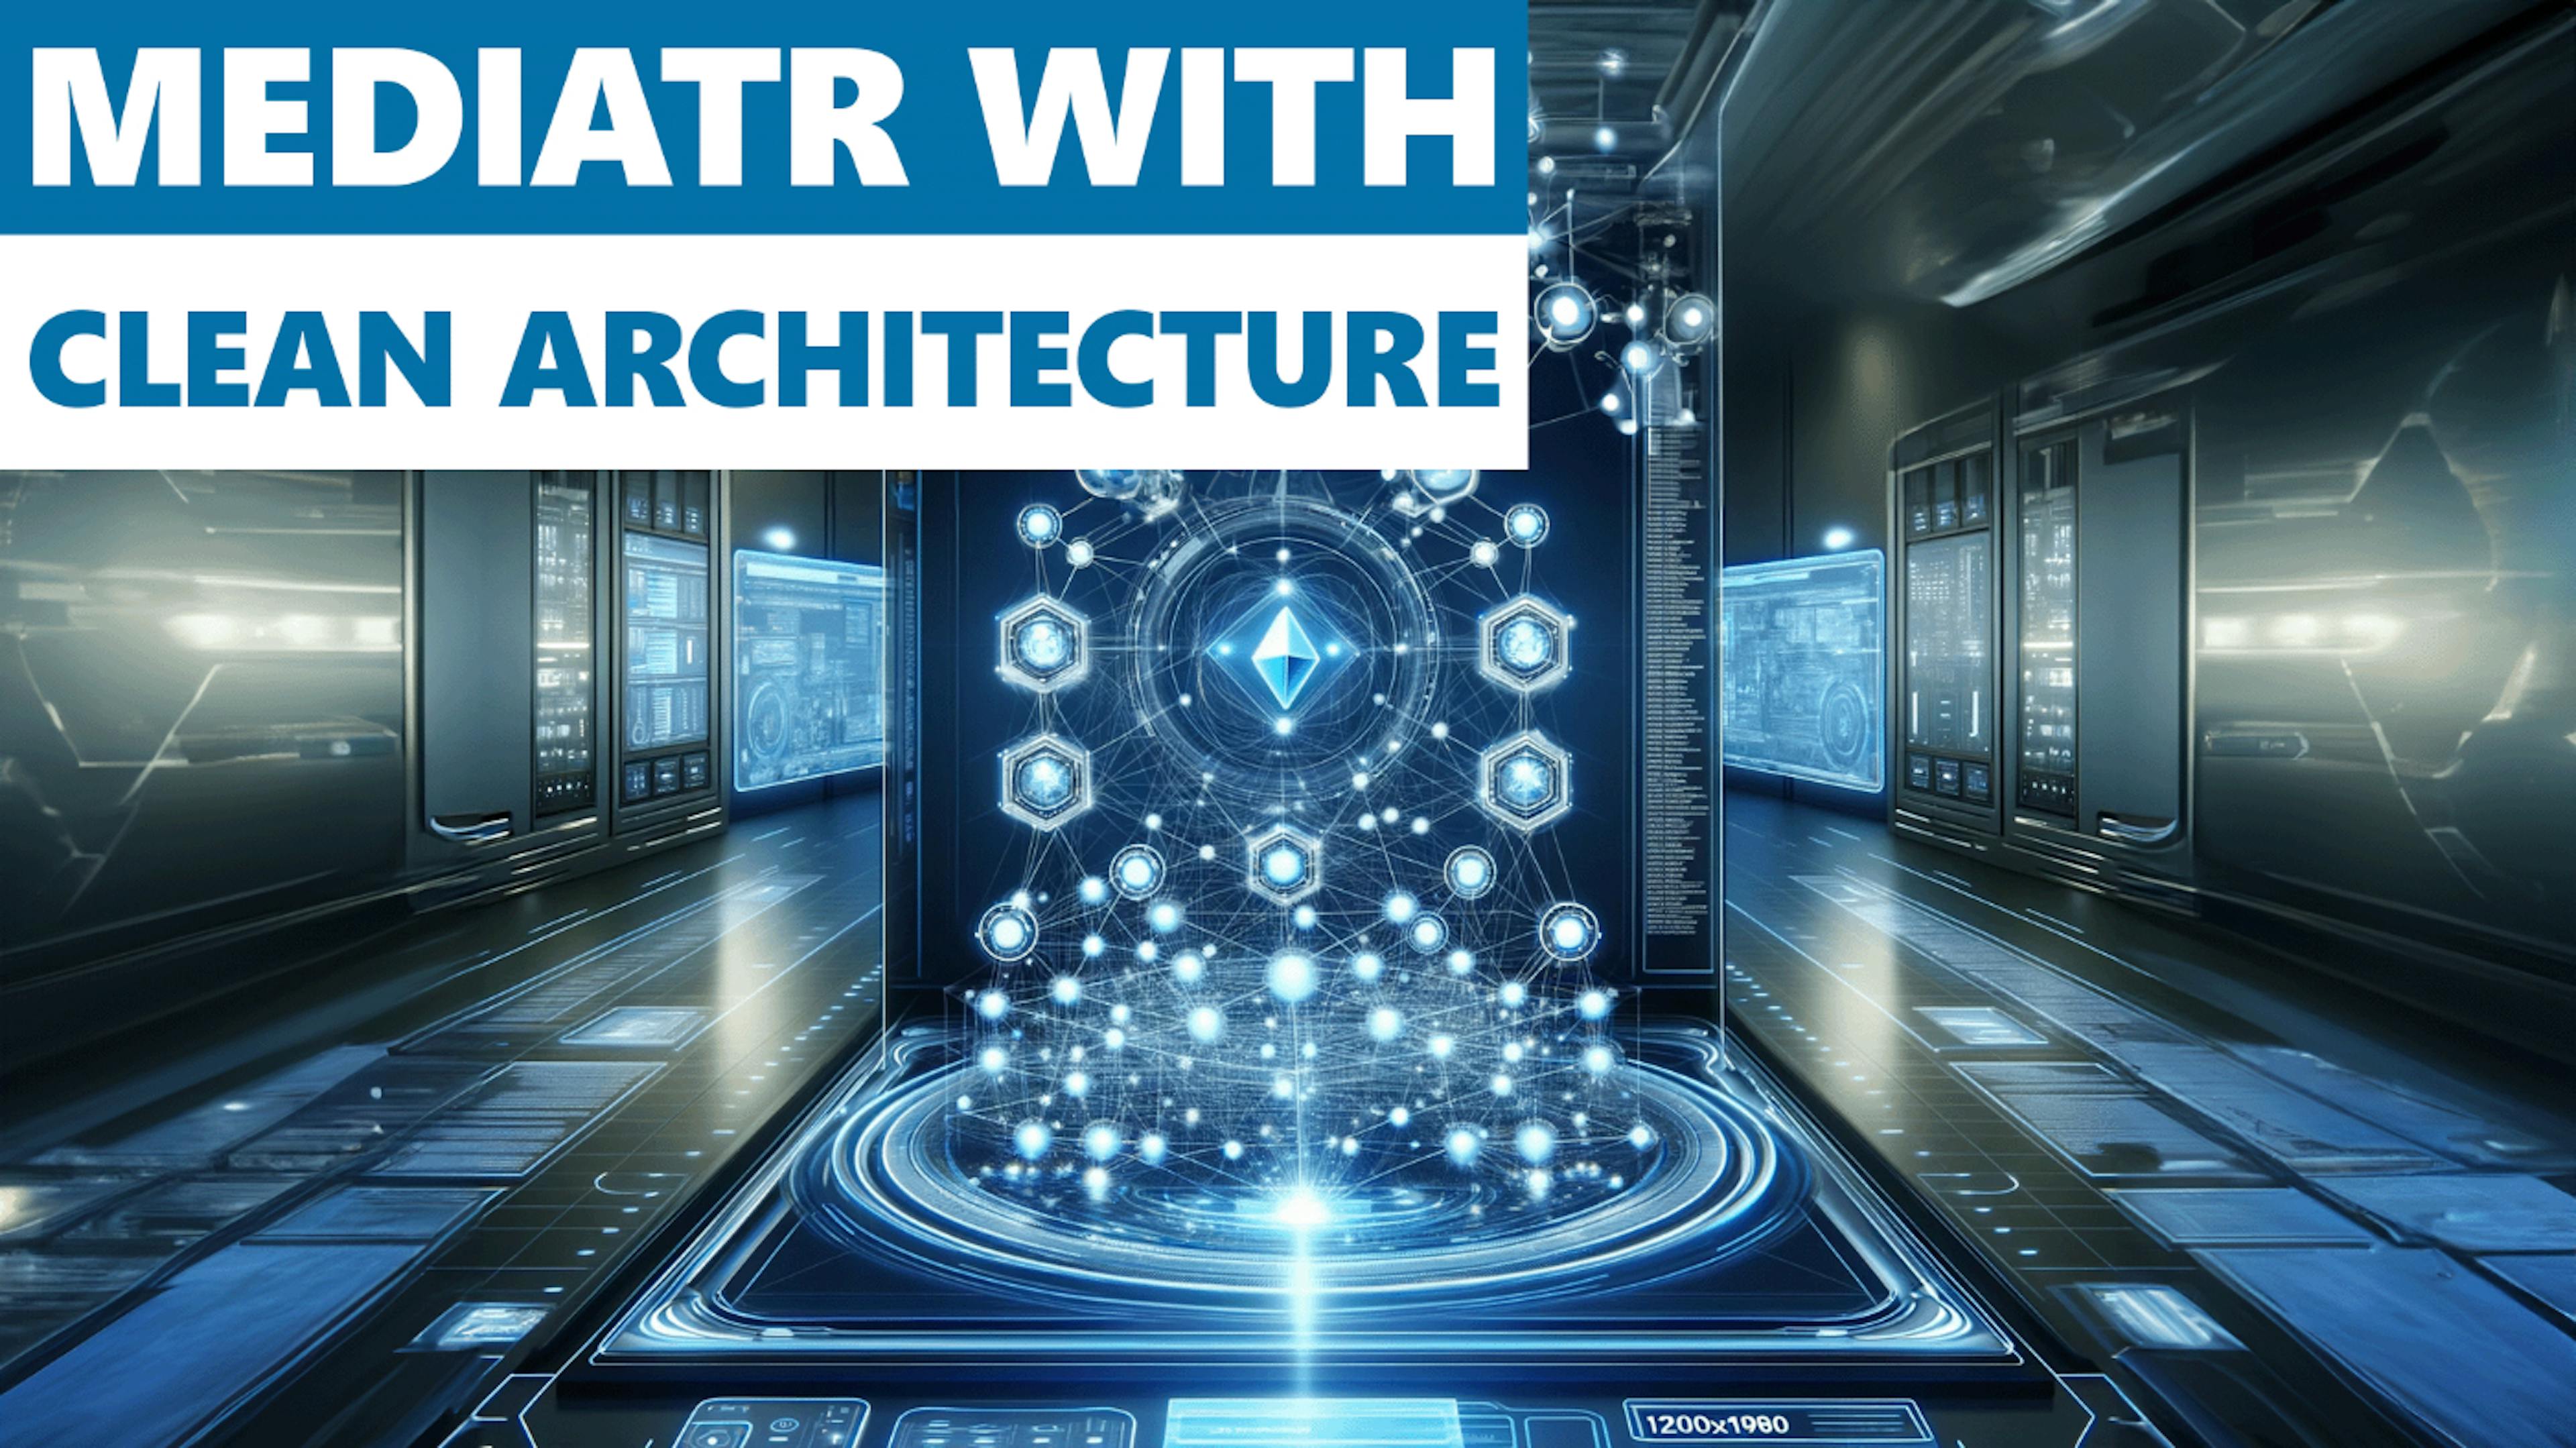 featured image - Using MediatR with Clean Architecture in C# to Build for Flexibility